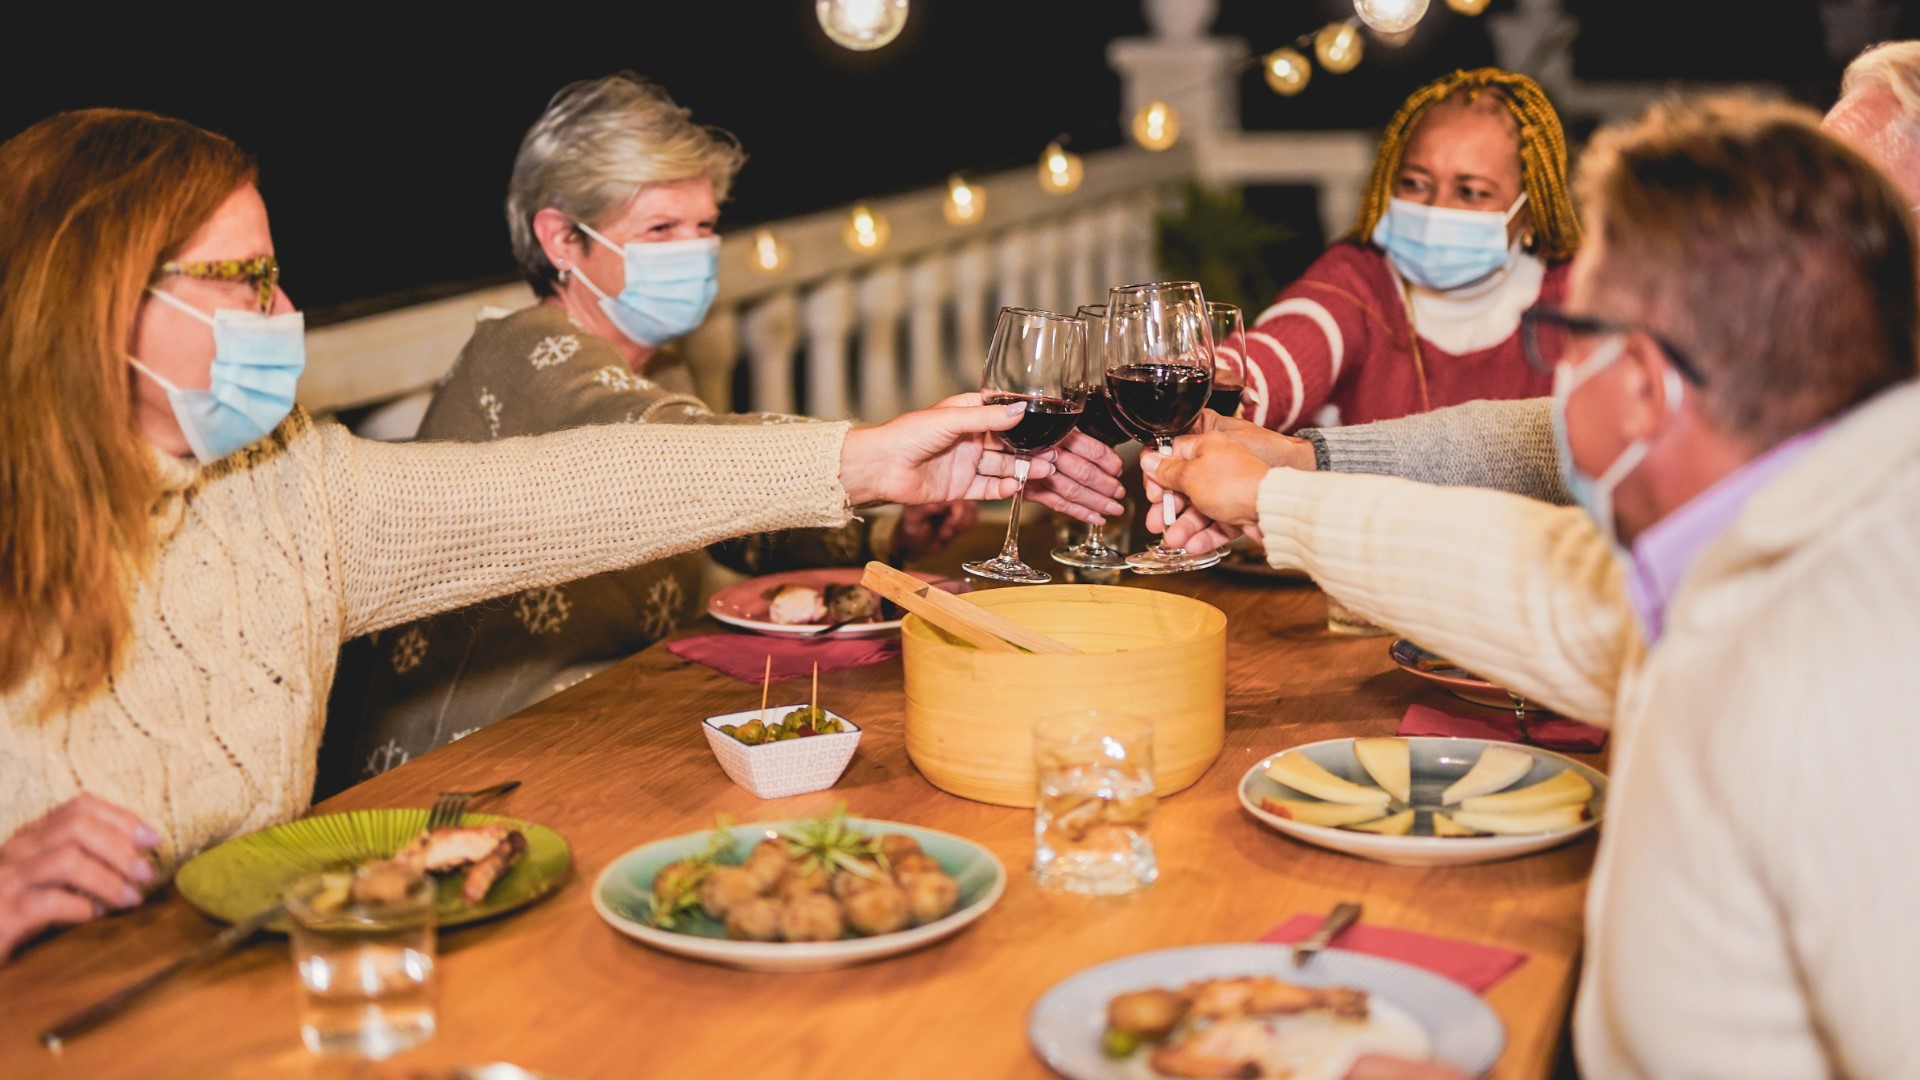 Doctors around Tampa Bay shared the modifications they made to their own Thanksgiving traditions to limit the spread of the coronavirus.